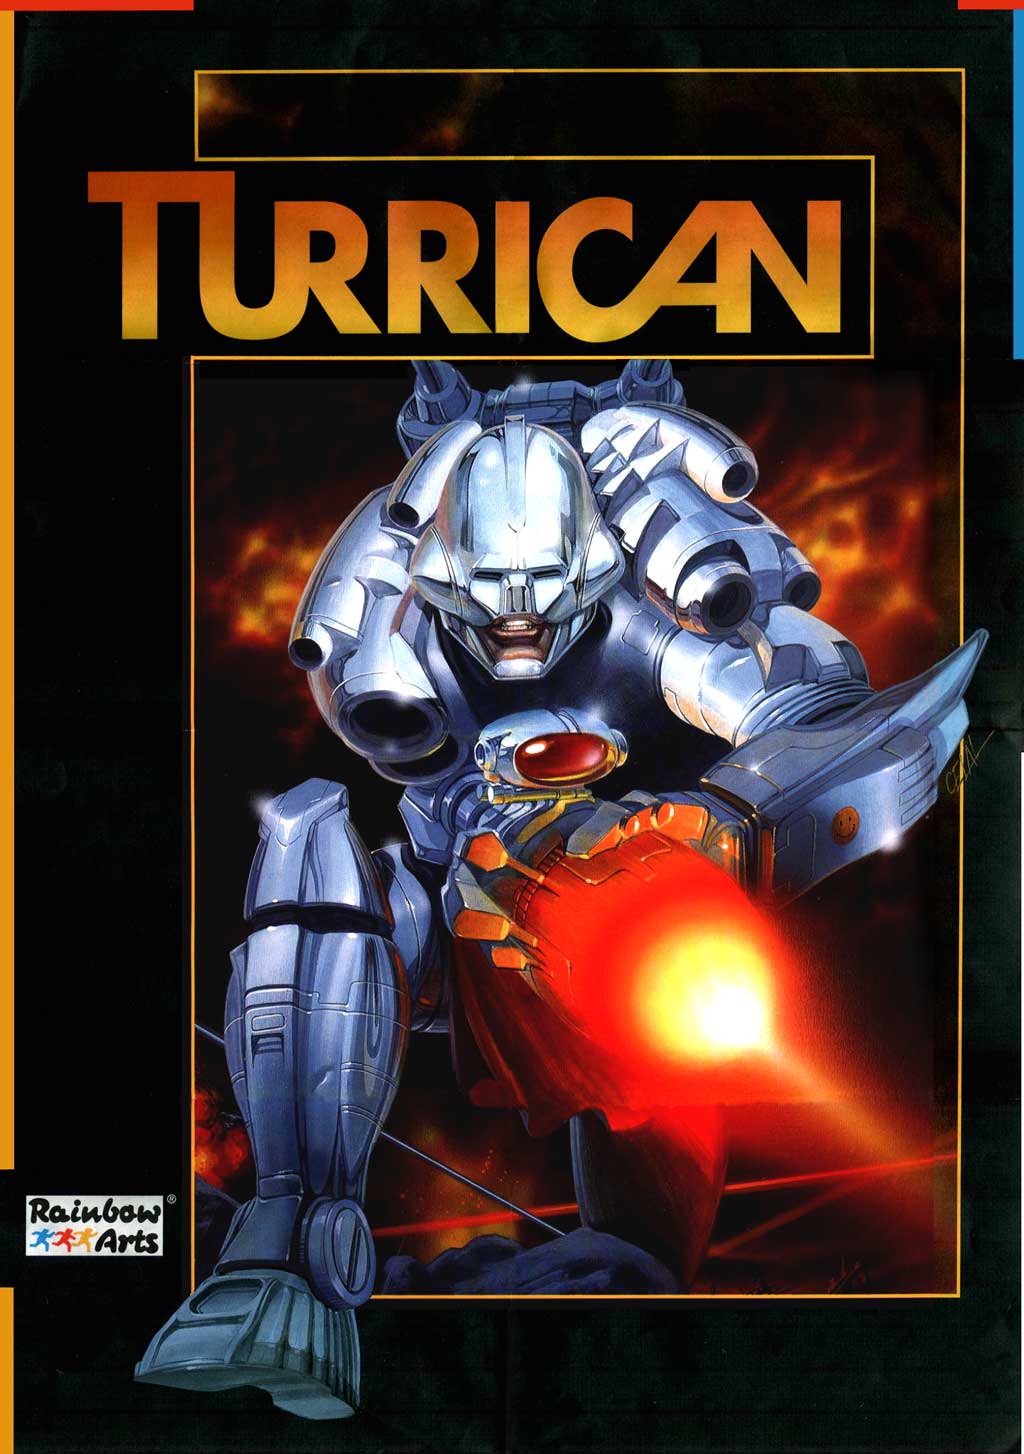 Turrican II Backgrounds, Compatible - PC, Mobile, Gadgets| 1024x1454 px